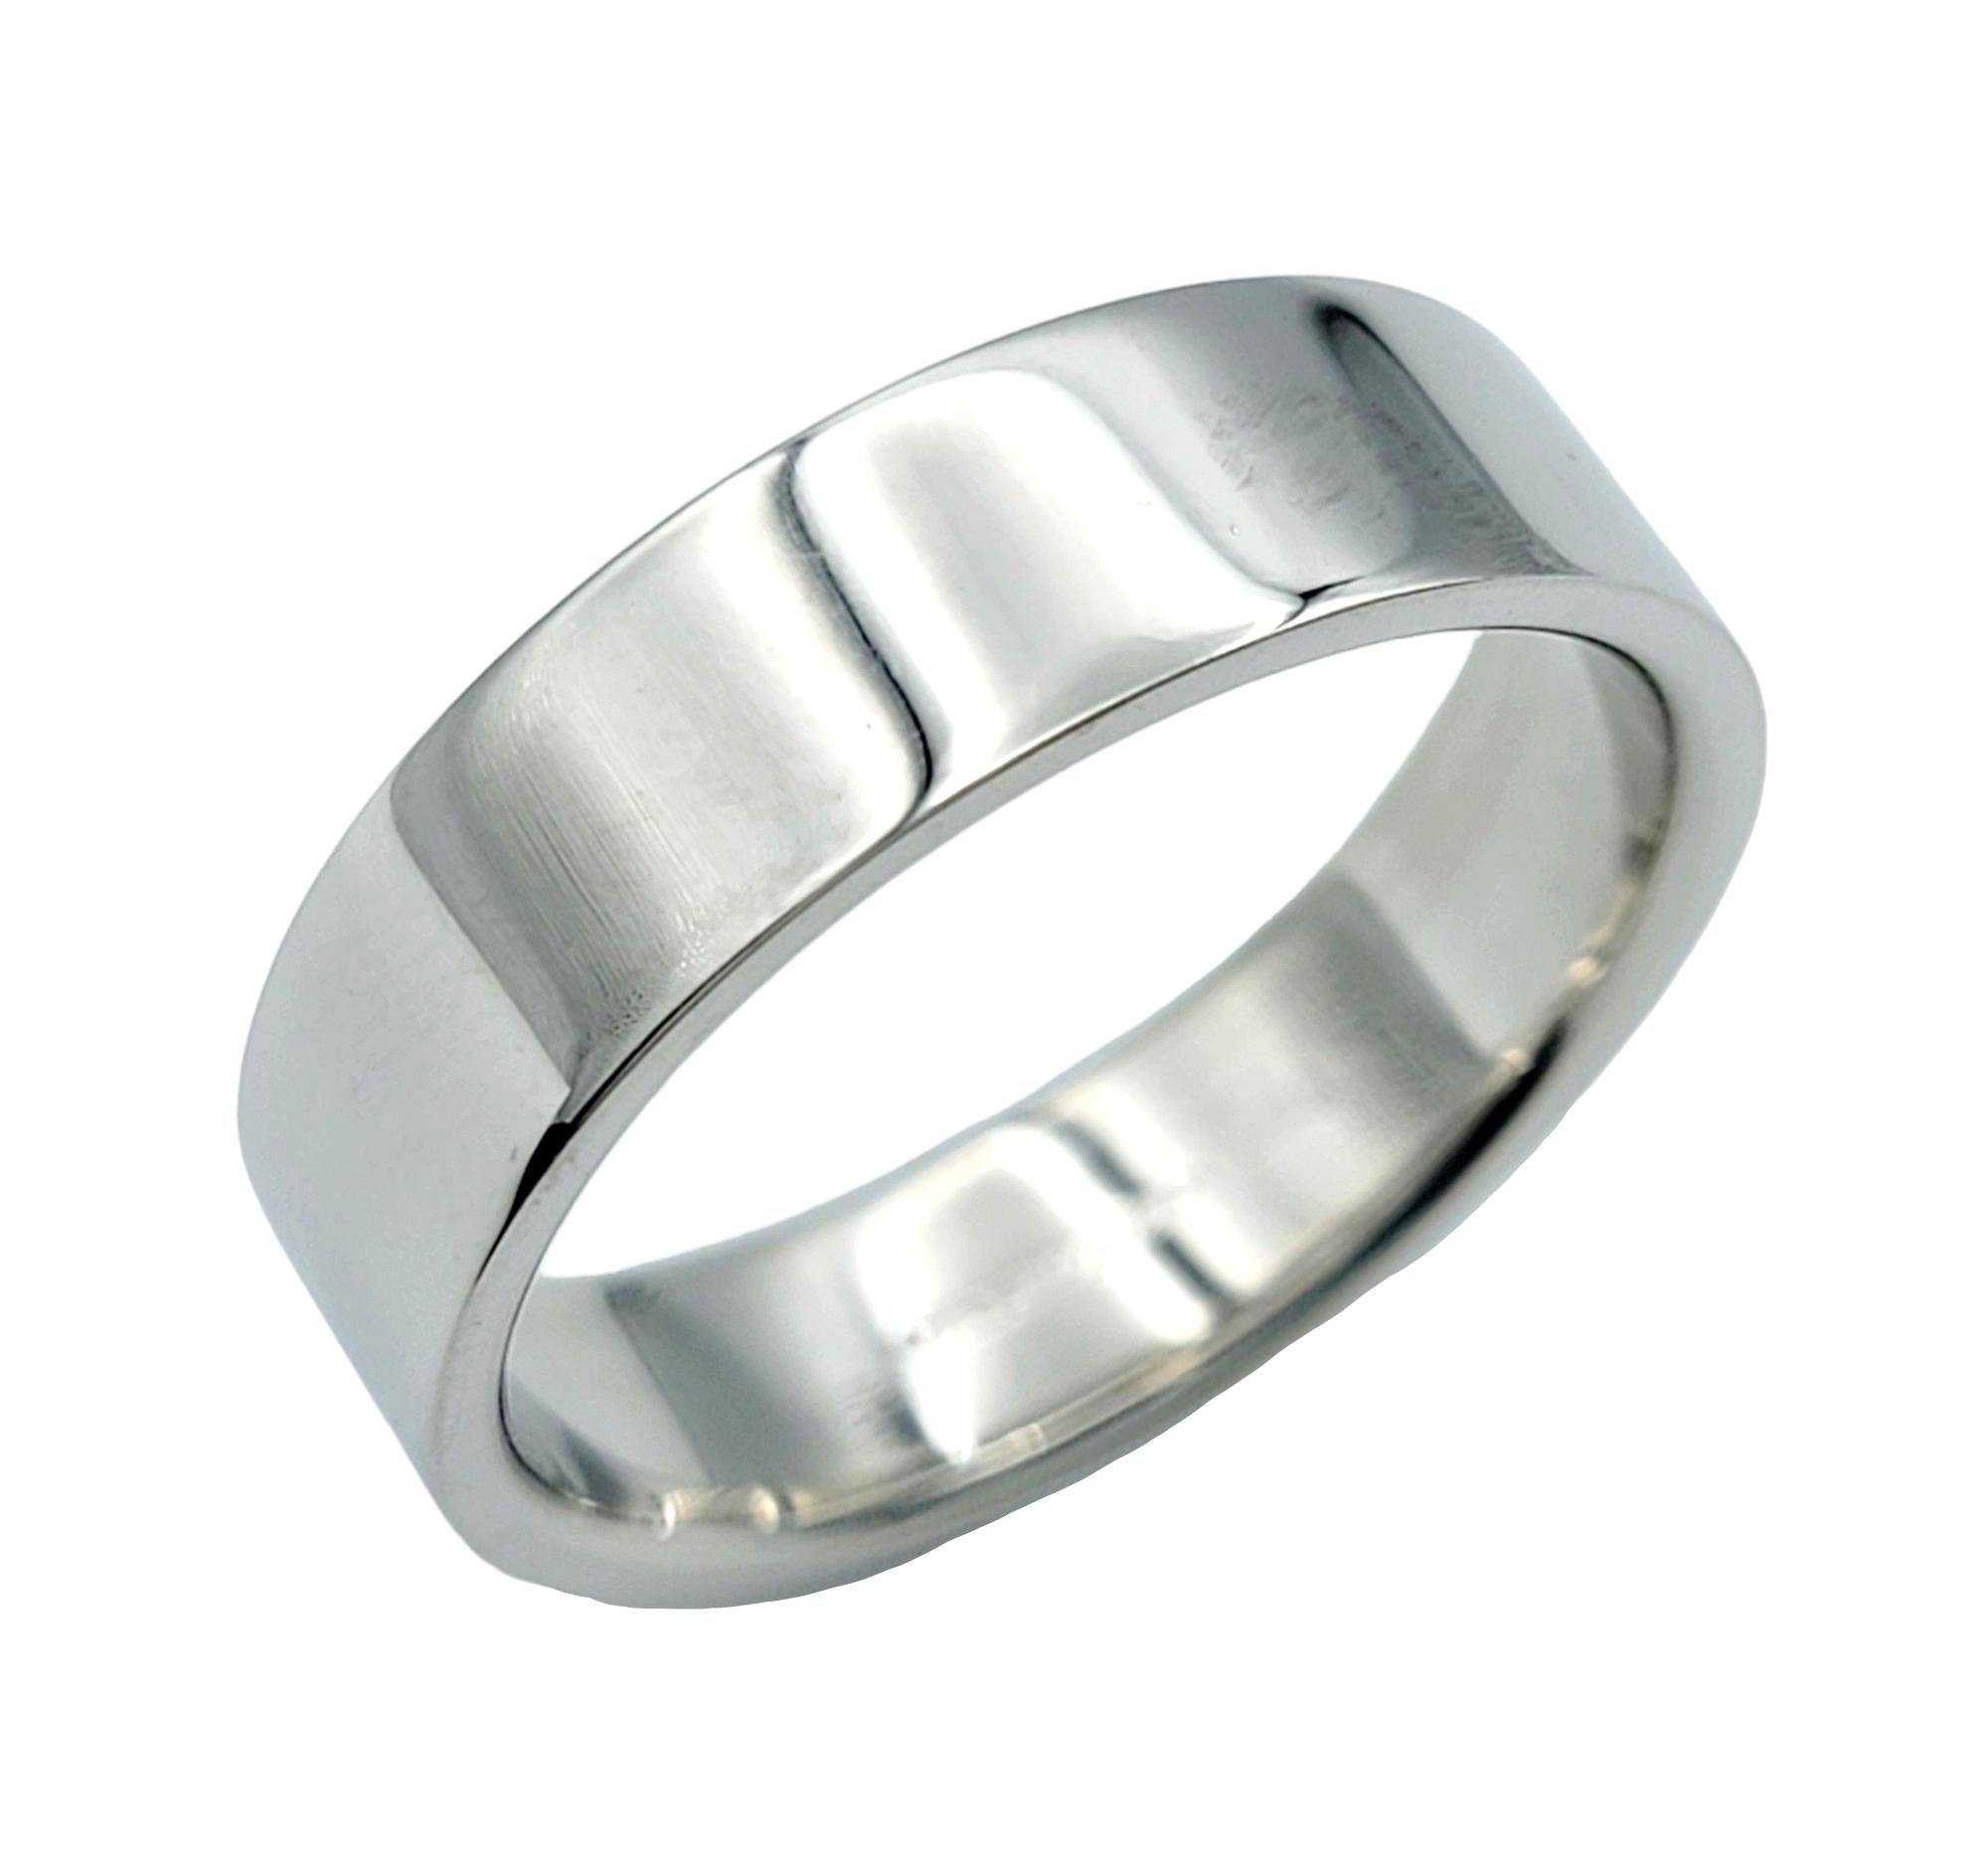 Ring Size: 9.5

Elegance meets simplicity in this timeless Tiffany & Co band ring crafted from luxurious platinum. The 6 mm width of the ring provides a substantial presence on the finger, while the high-polish finish accentuates the inherent luster